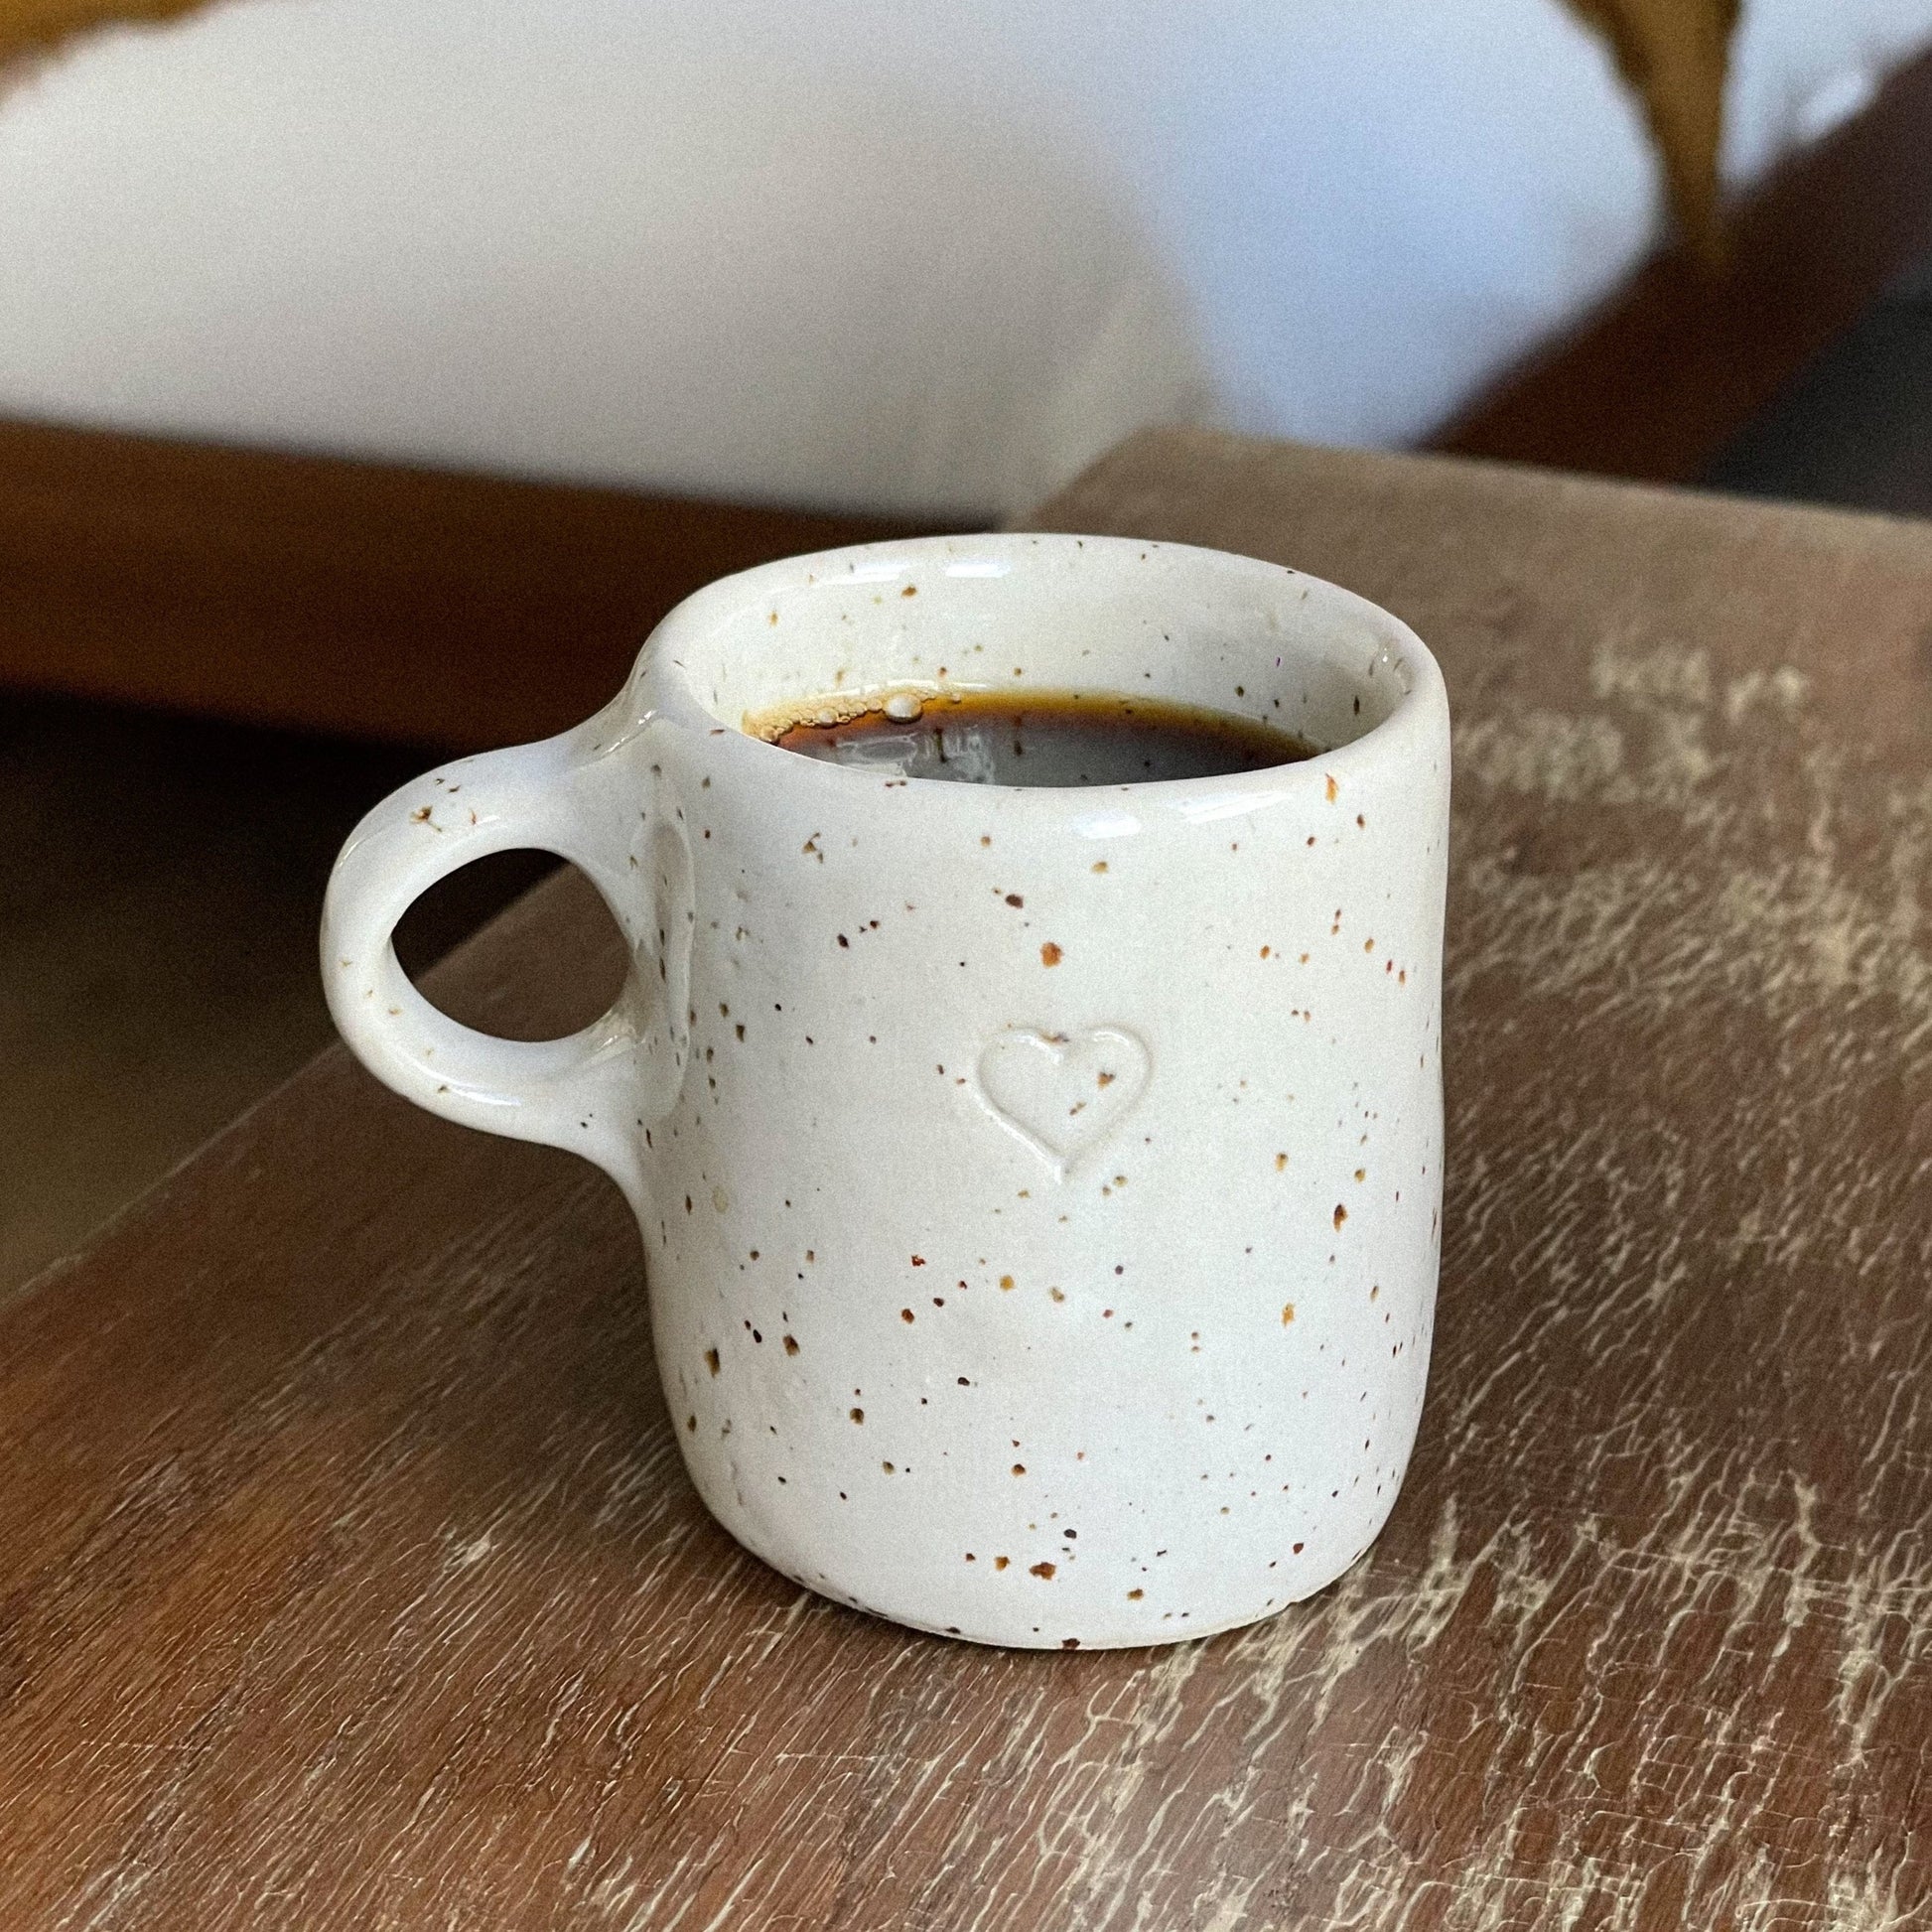 Sip in style with our handmade ceramic espresso cup featuring a charming heart stamp and a unique sparkled effect. Elevate your coffee moment with this special touch of flair